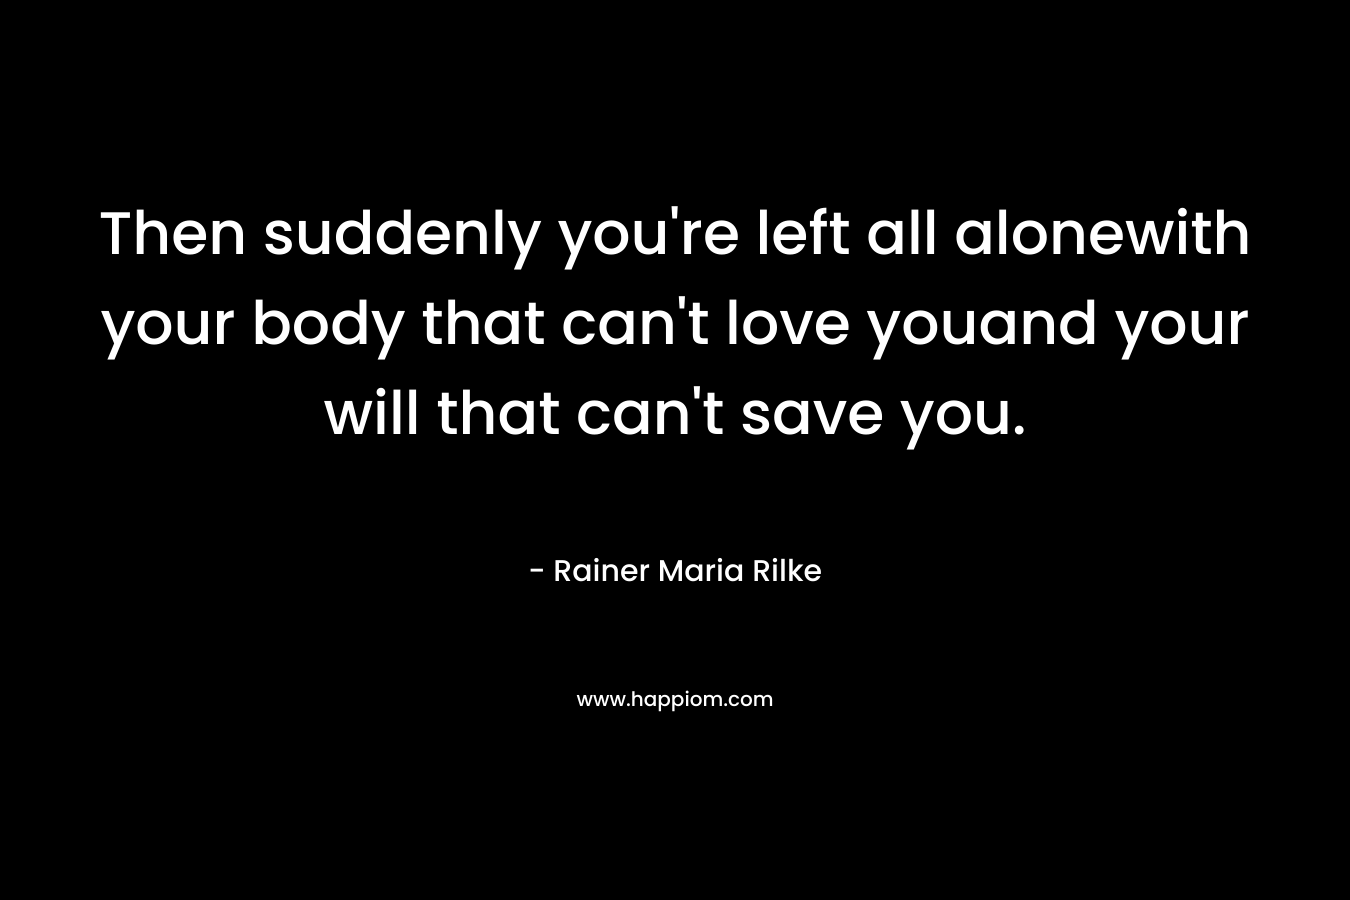 Then suddenly you’re left all alonewith your body that can’t love youand your will that can’t save you. – Rainer Maria Rilke